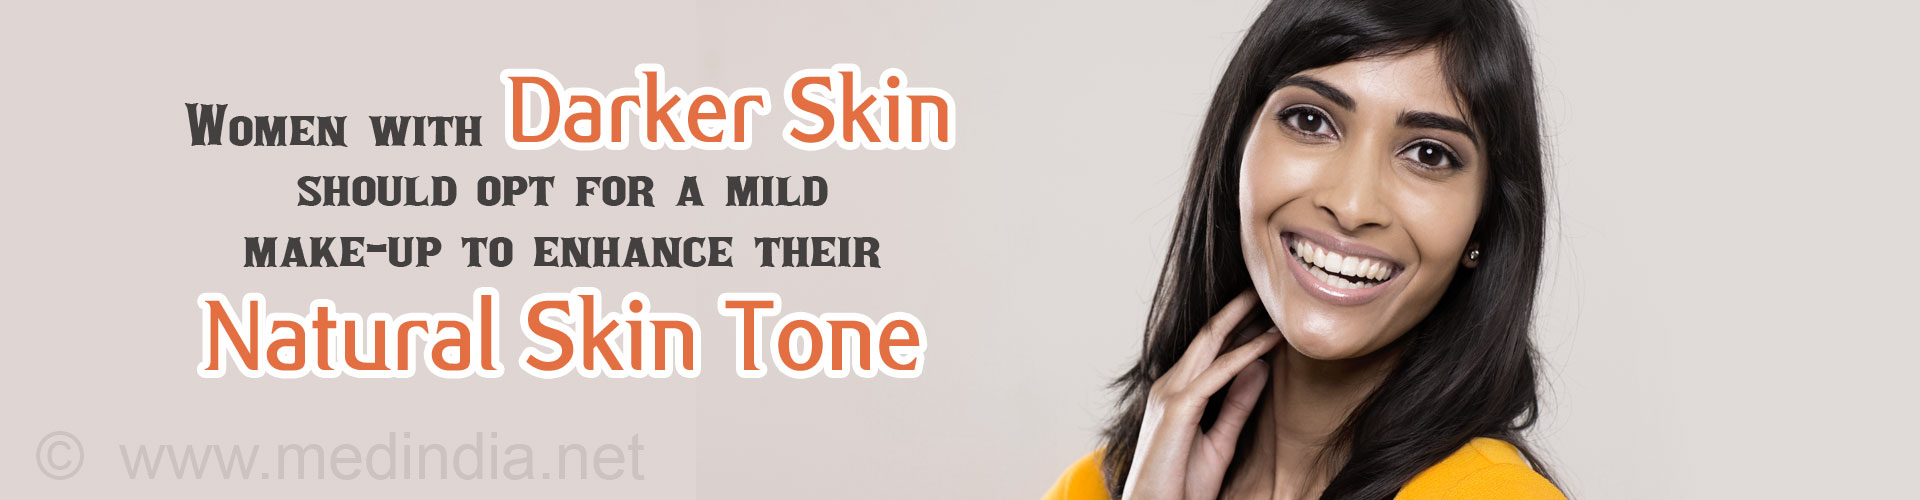 Women with Darker skin Should Opt for Mild Make-up to Enhance Their Natural Skin Tone